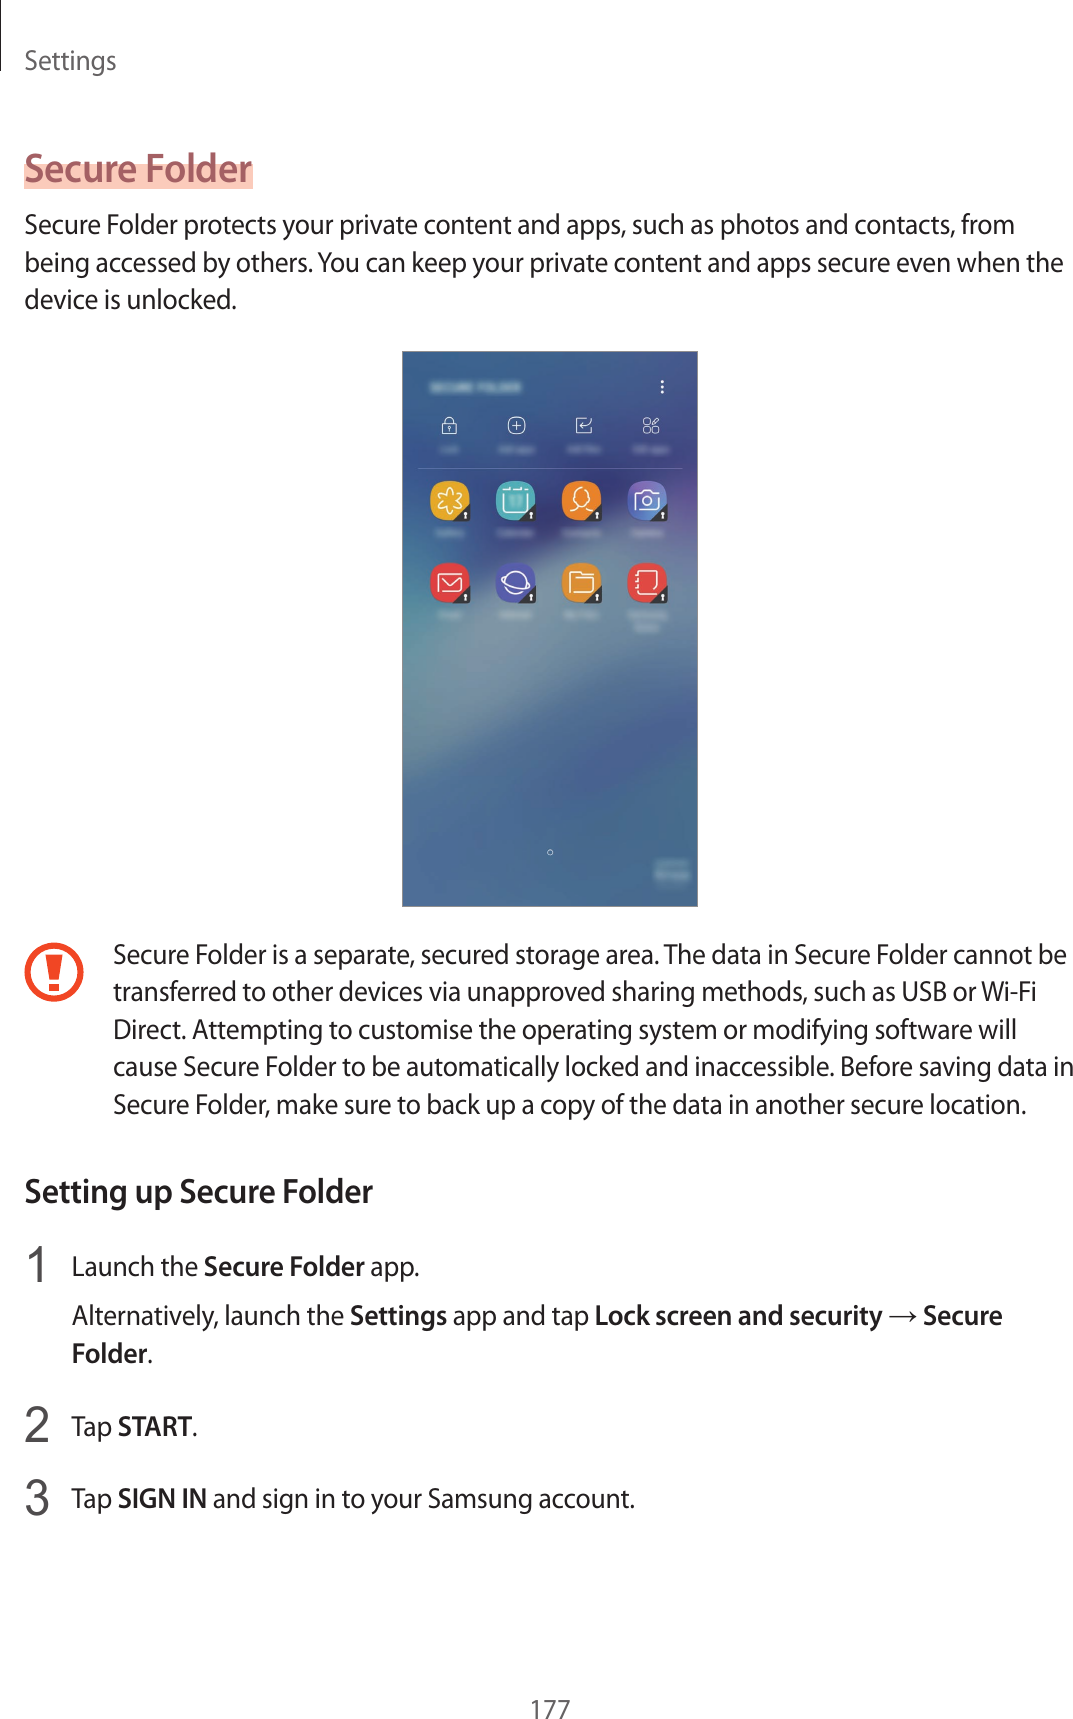 Settings177Secure FolderSecure Folder protects your private content and apps, such as photos and contacts, from being accessed by others. You can keep your private content and apps secure even when the device is unlocked.Secure Folder is a separate, secured storage area. The data in Secure Folder cannot be transferred to other devices via unapproved sharing methods, such as USB or Wi-Fi Direct. Attempting to customise the operating system or modifying software will cause Secure Folder to be automatically locked and inaccessible. Before saving data in Secure Folder, make sure to back up a copy of the data in another secure location.Setting up Secure Folder1  Launch the Secure Folder app.Alternatively, launch the Settings app and tap Lock screen and security → Secure Folder.2  Tap START.3  Tap SIGN IN and sign in to your Samsung account.